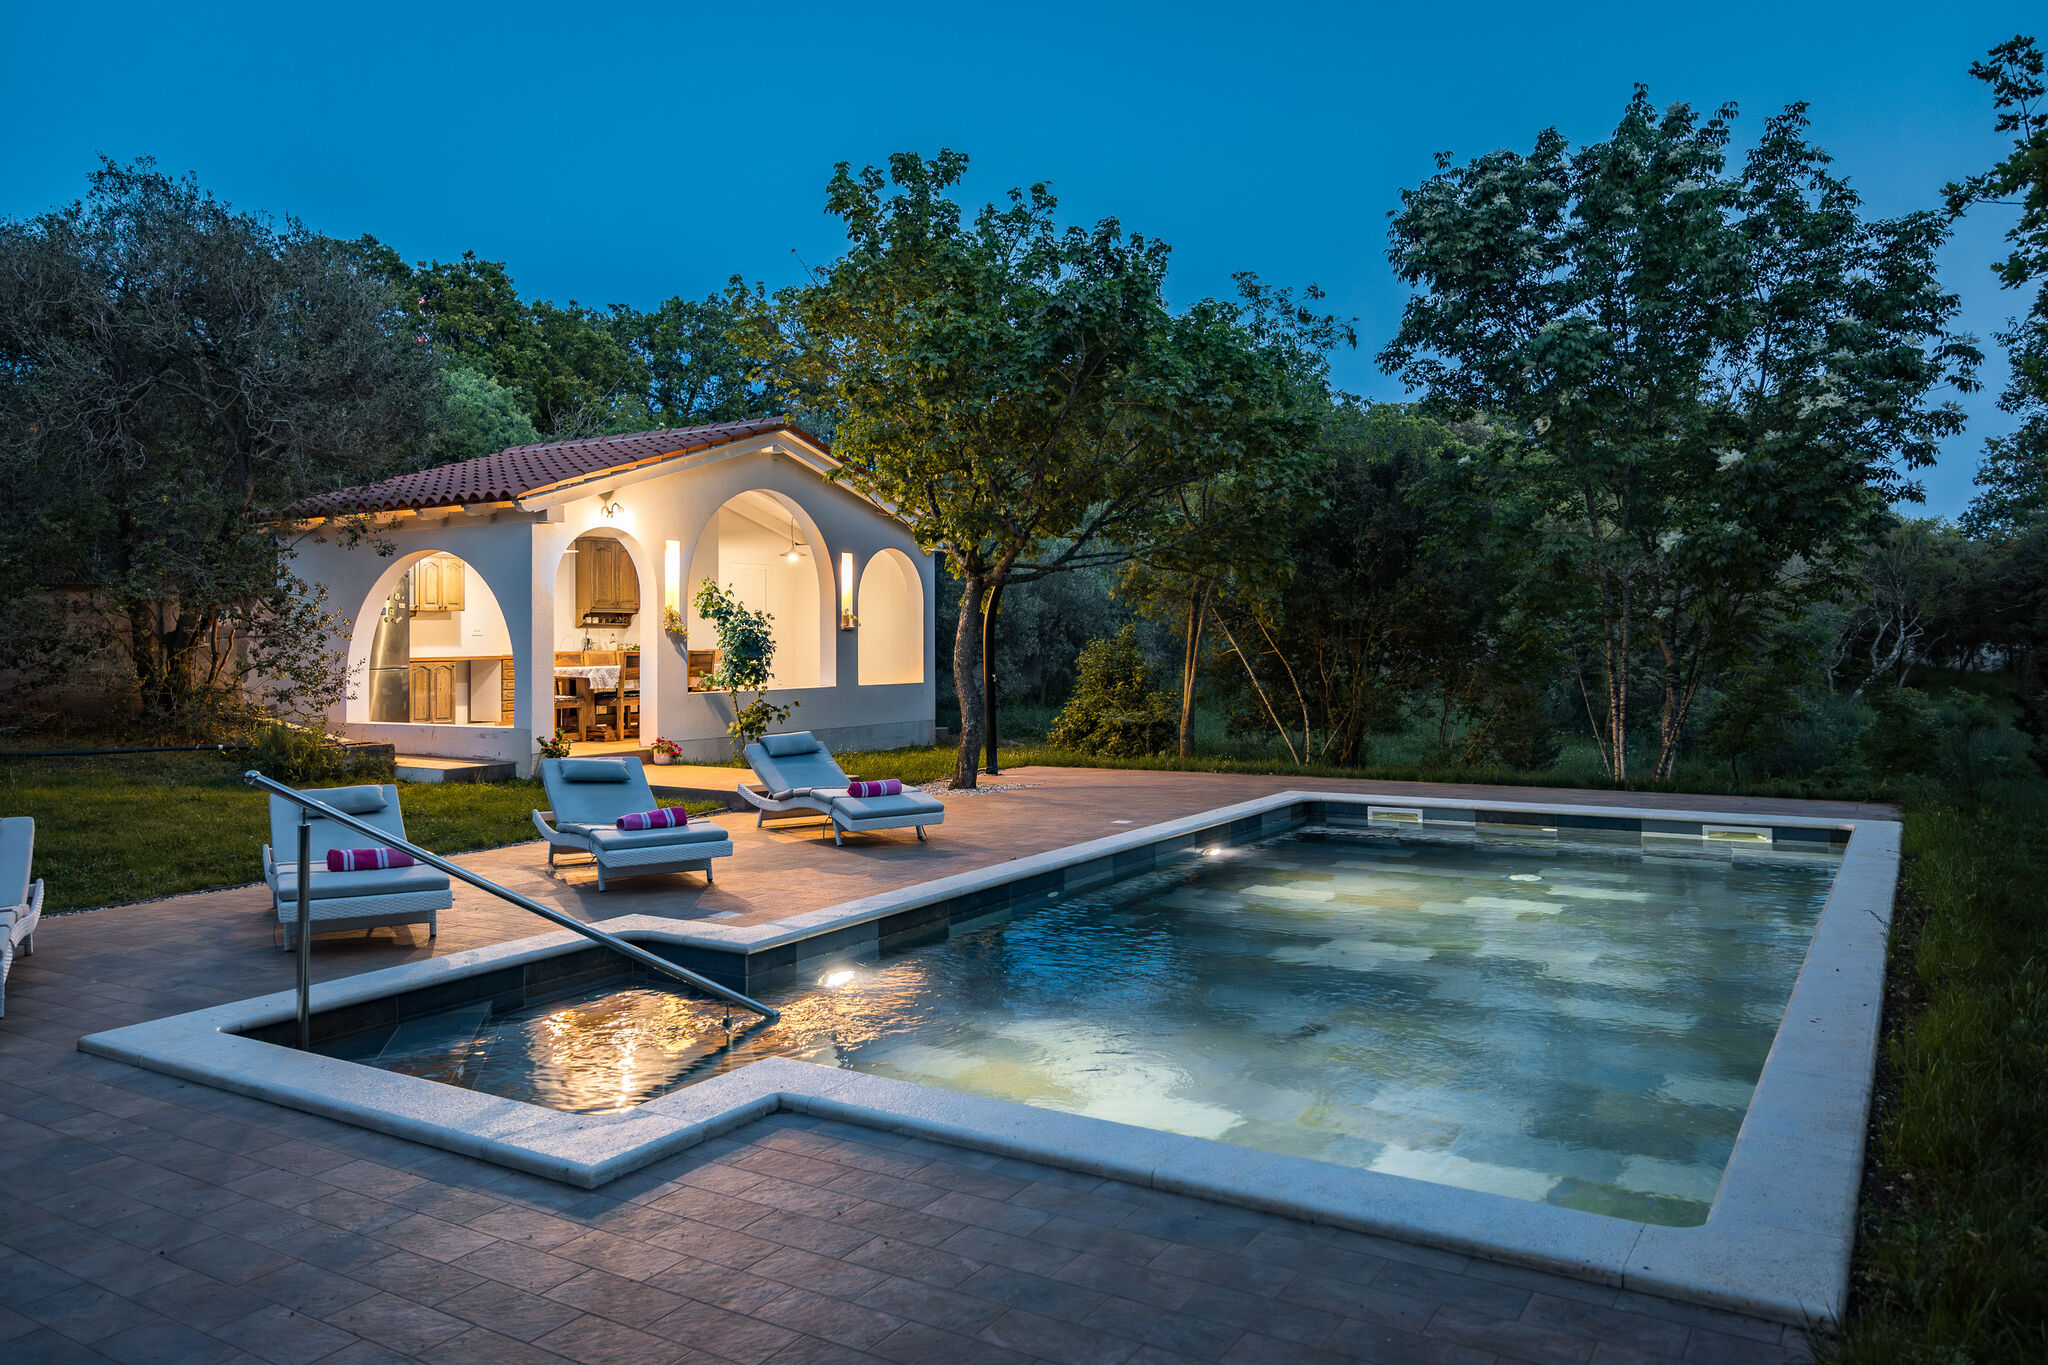 Beautiful villa with a private pool and a fenced garden